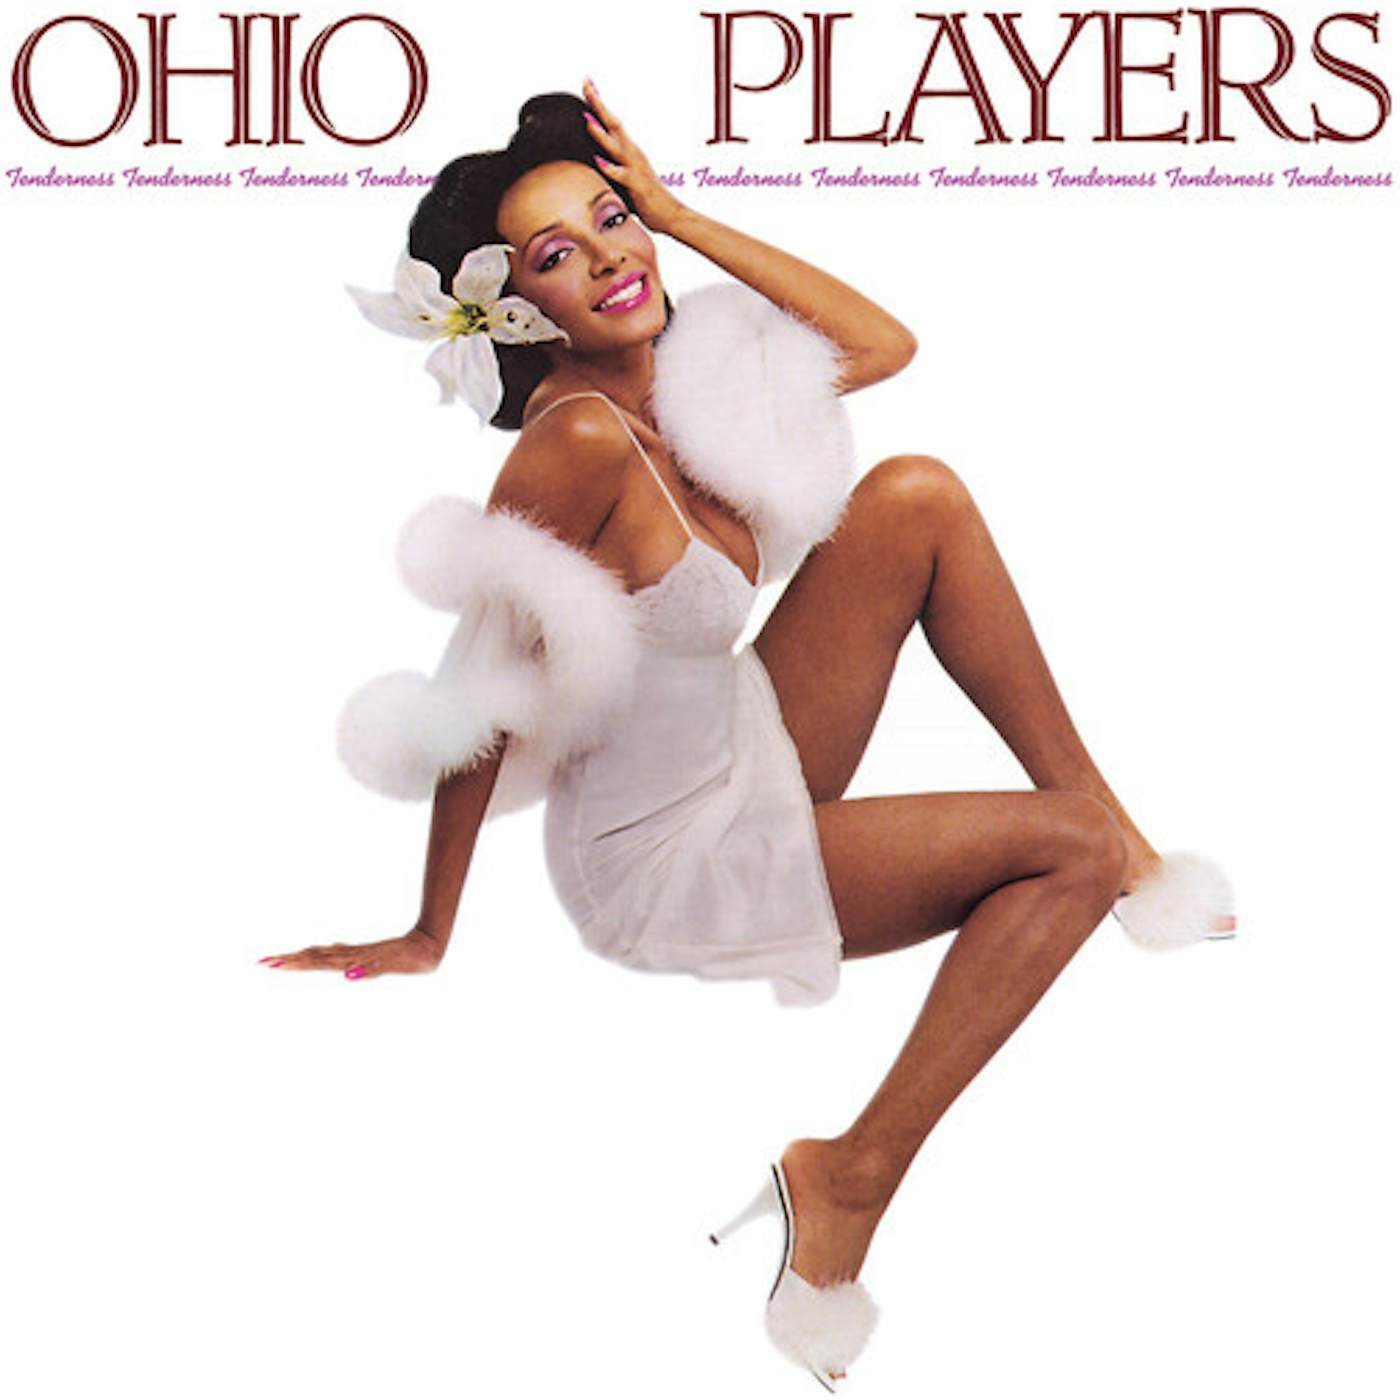 Ohio Players TENDERNESS - EXPANDED EDITION CD